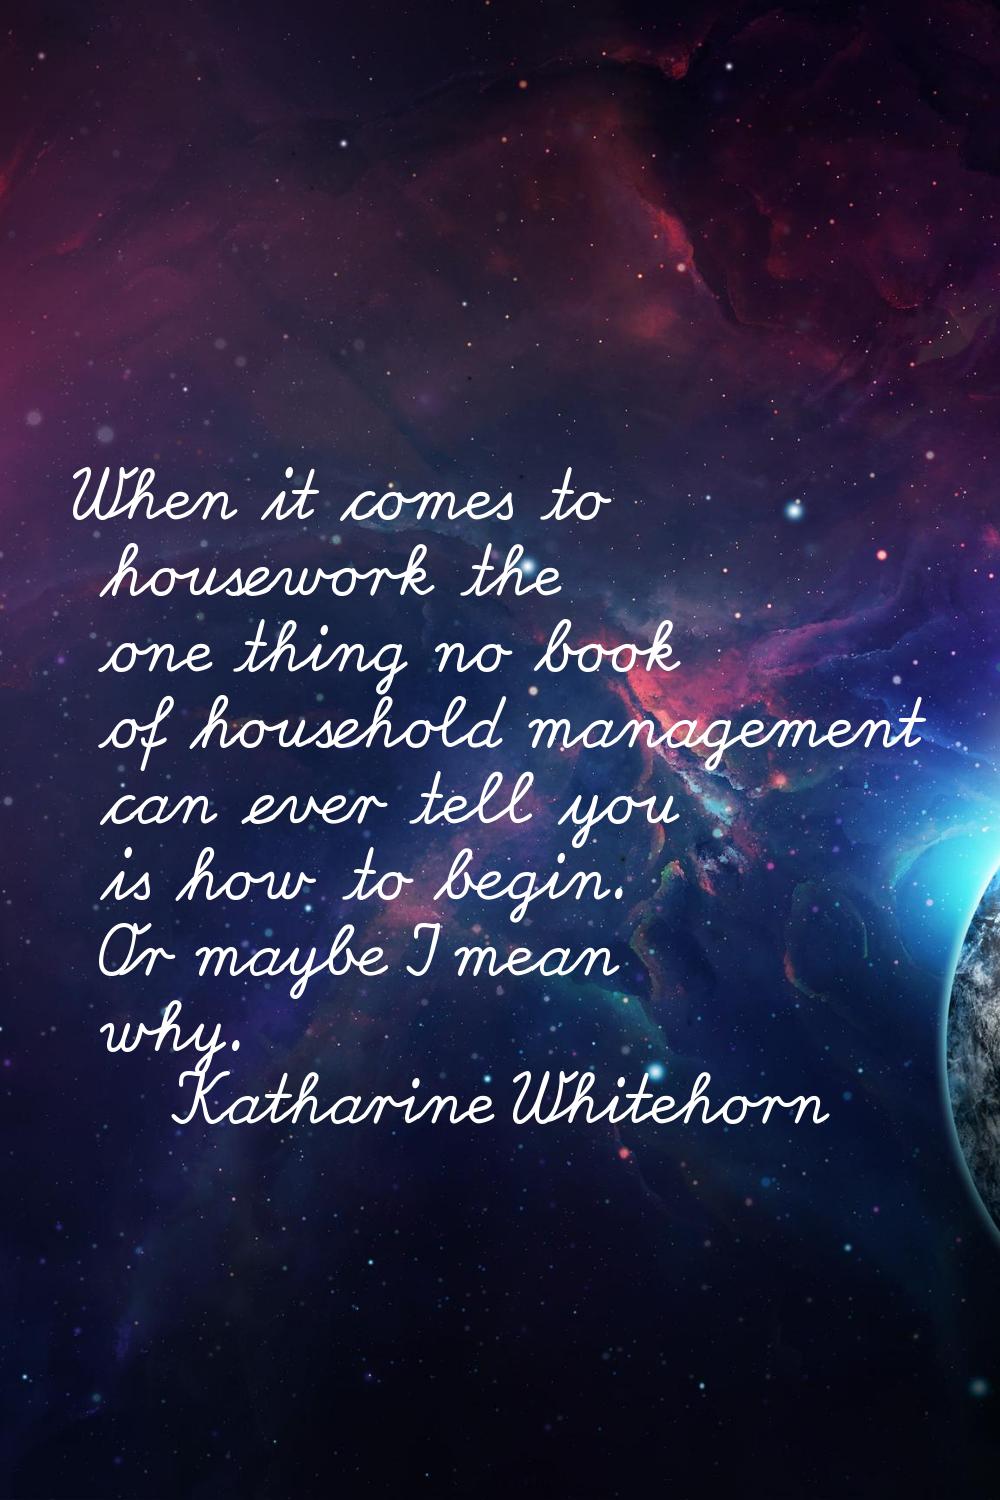 When it comes to housework the one thing no book of household management can ever tell you is how t